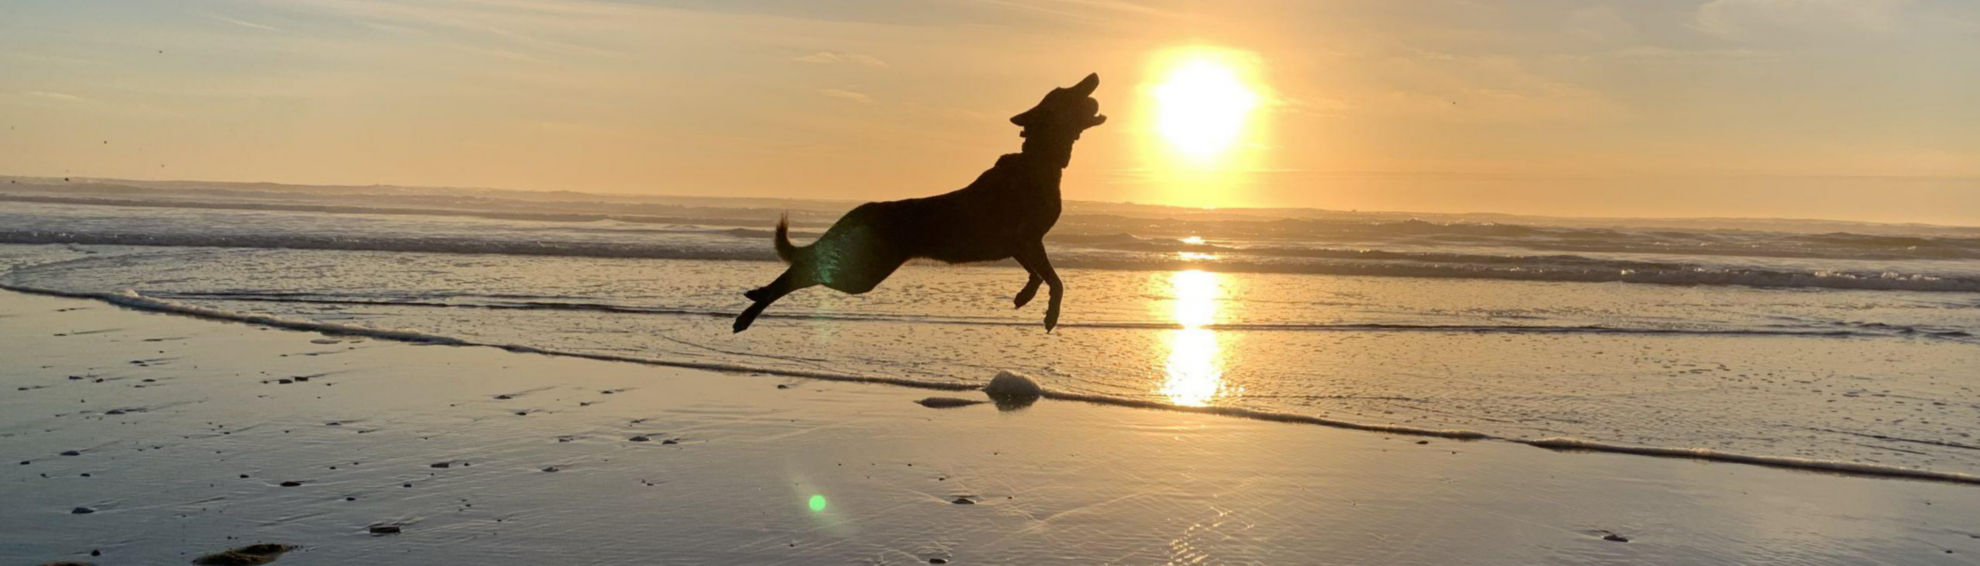 A dog jumping in the air on a beach with the sun setting behind him